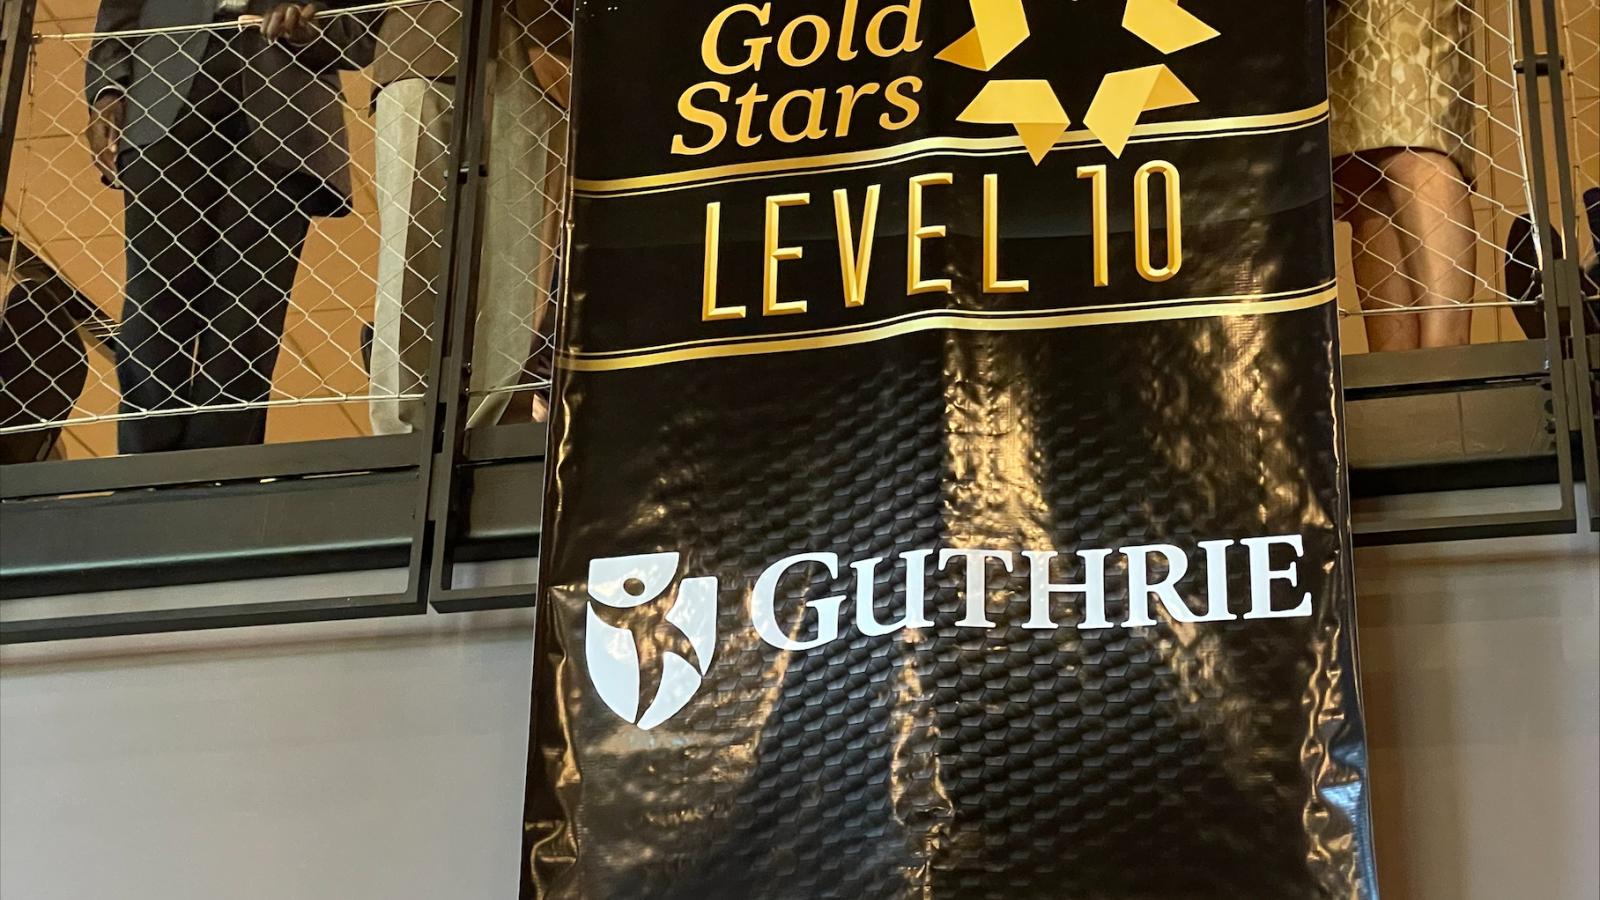 The Guthrie Clinic Achieves Epic Gold Stars Level 10 